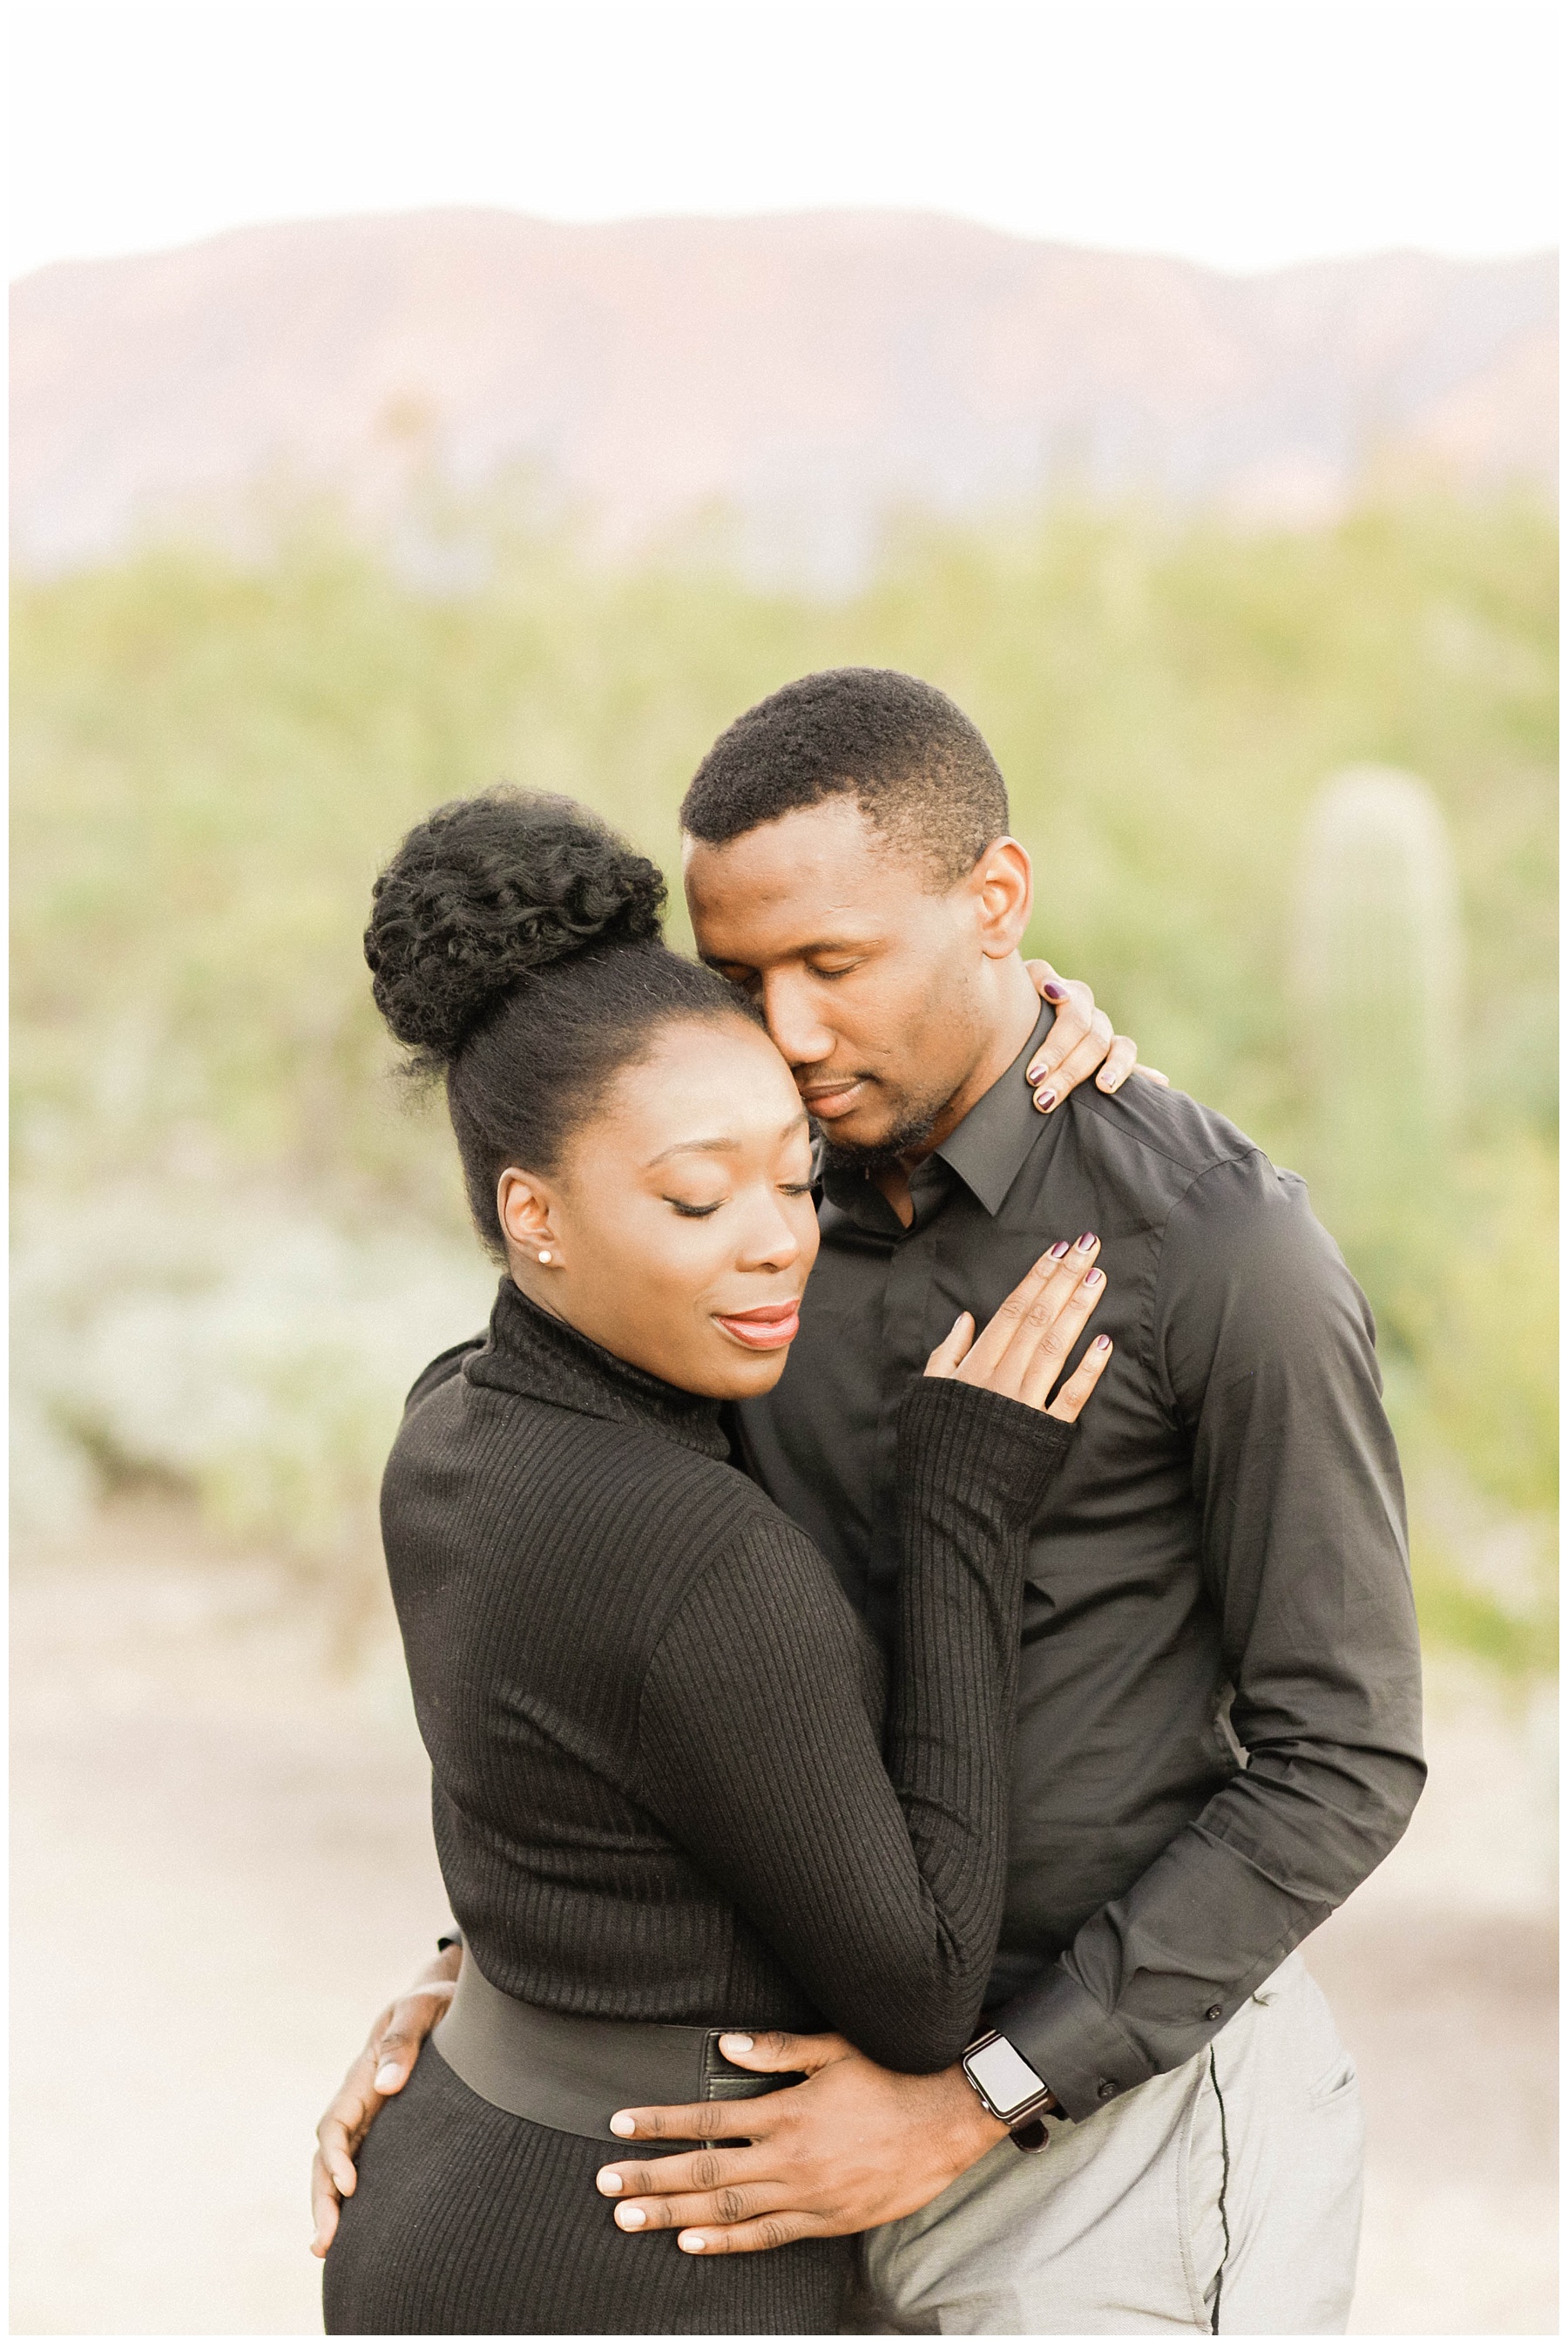 Tucson Couples Photography Session at Honeybee Canyon